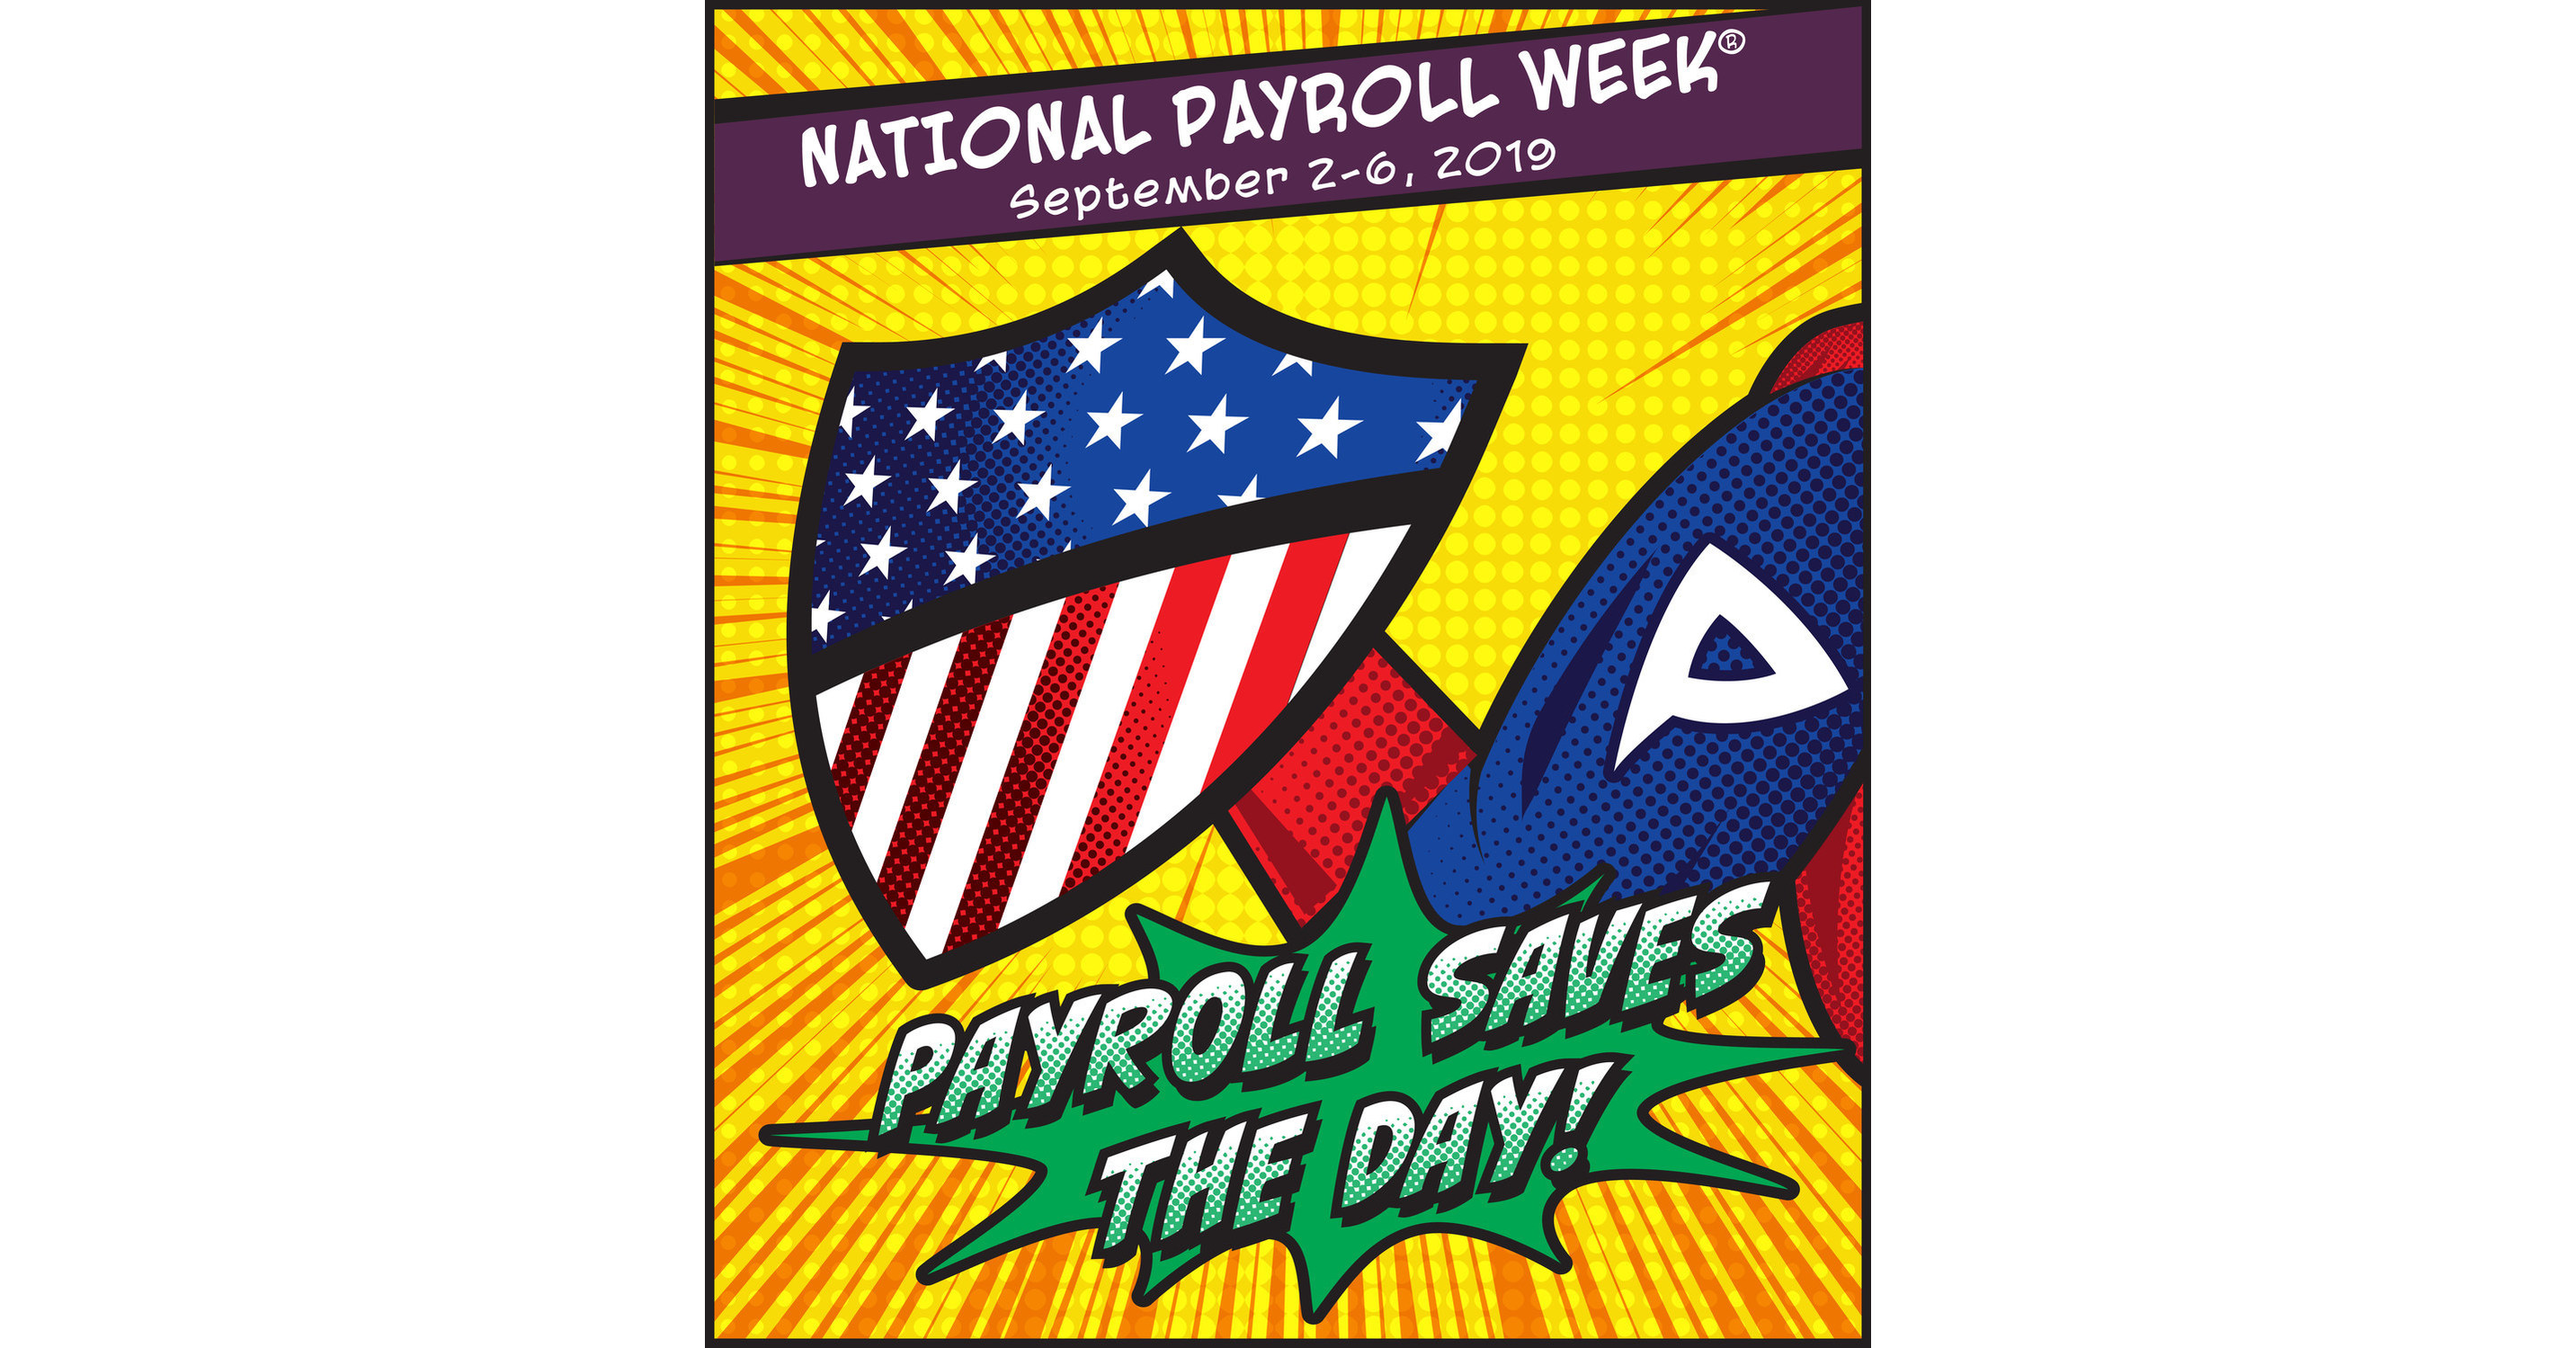 Tap into the Power of the Paycheck, Win Prizes and Scholarships During